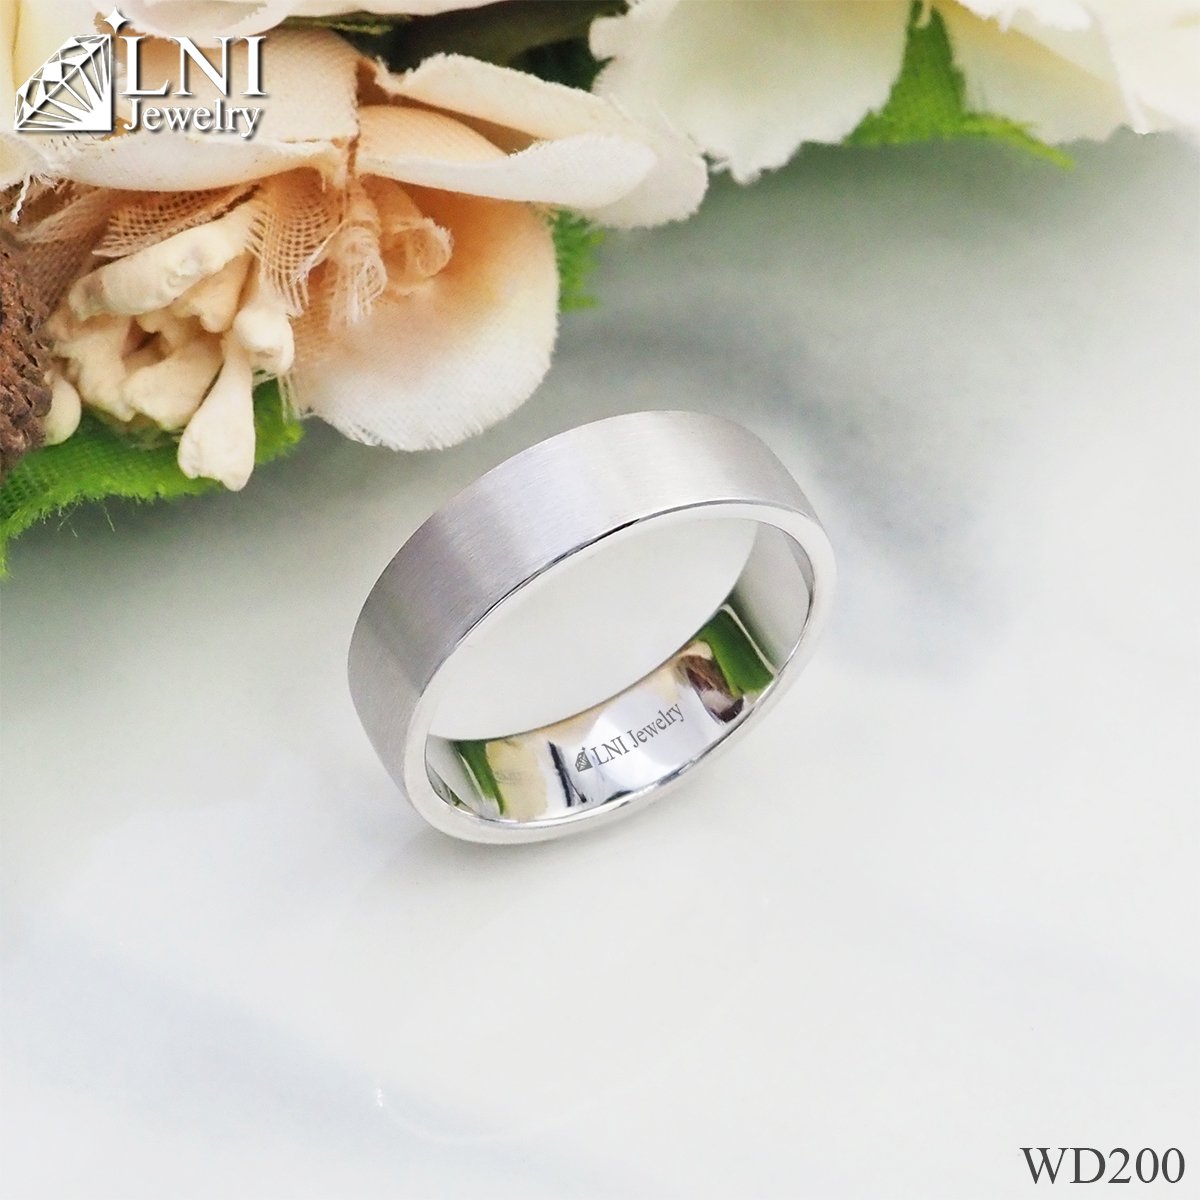 WD200 Smooth Ring